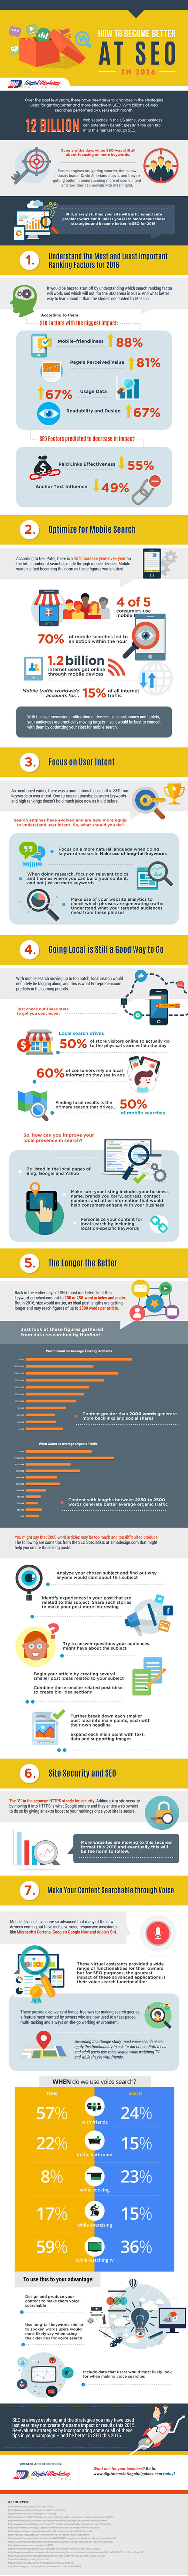 How to Become Better at SEO in 2016 (Infographic)